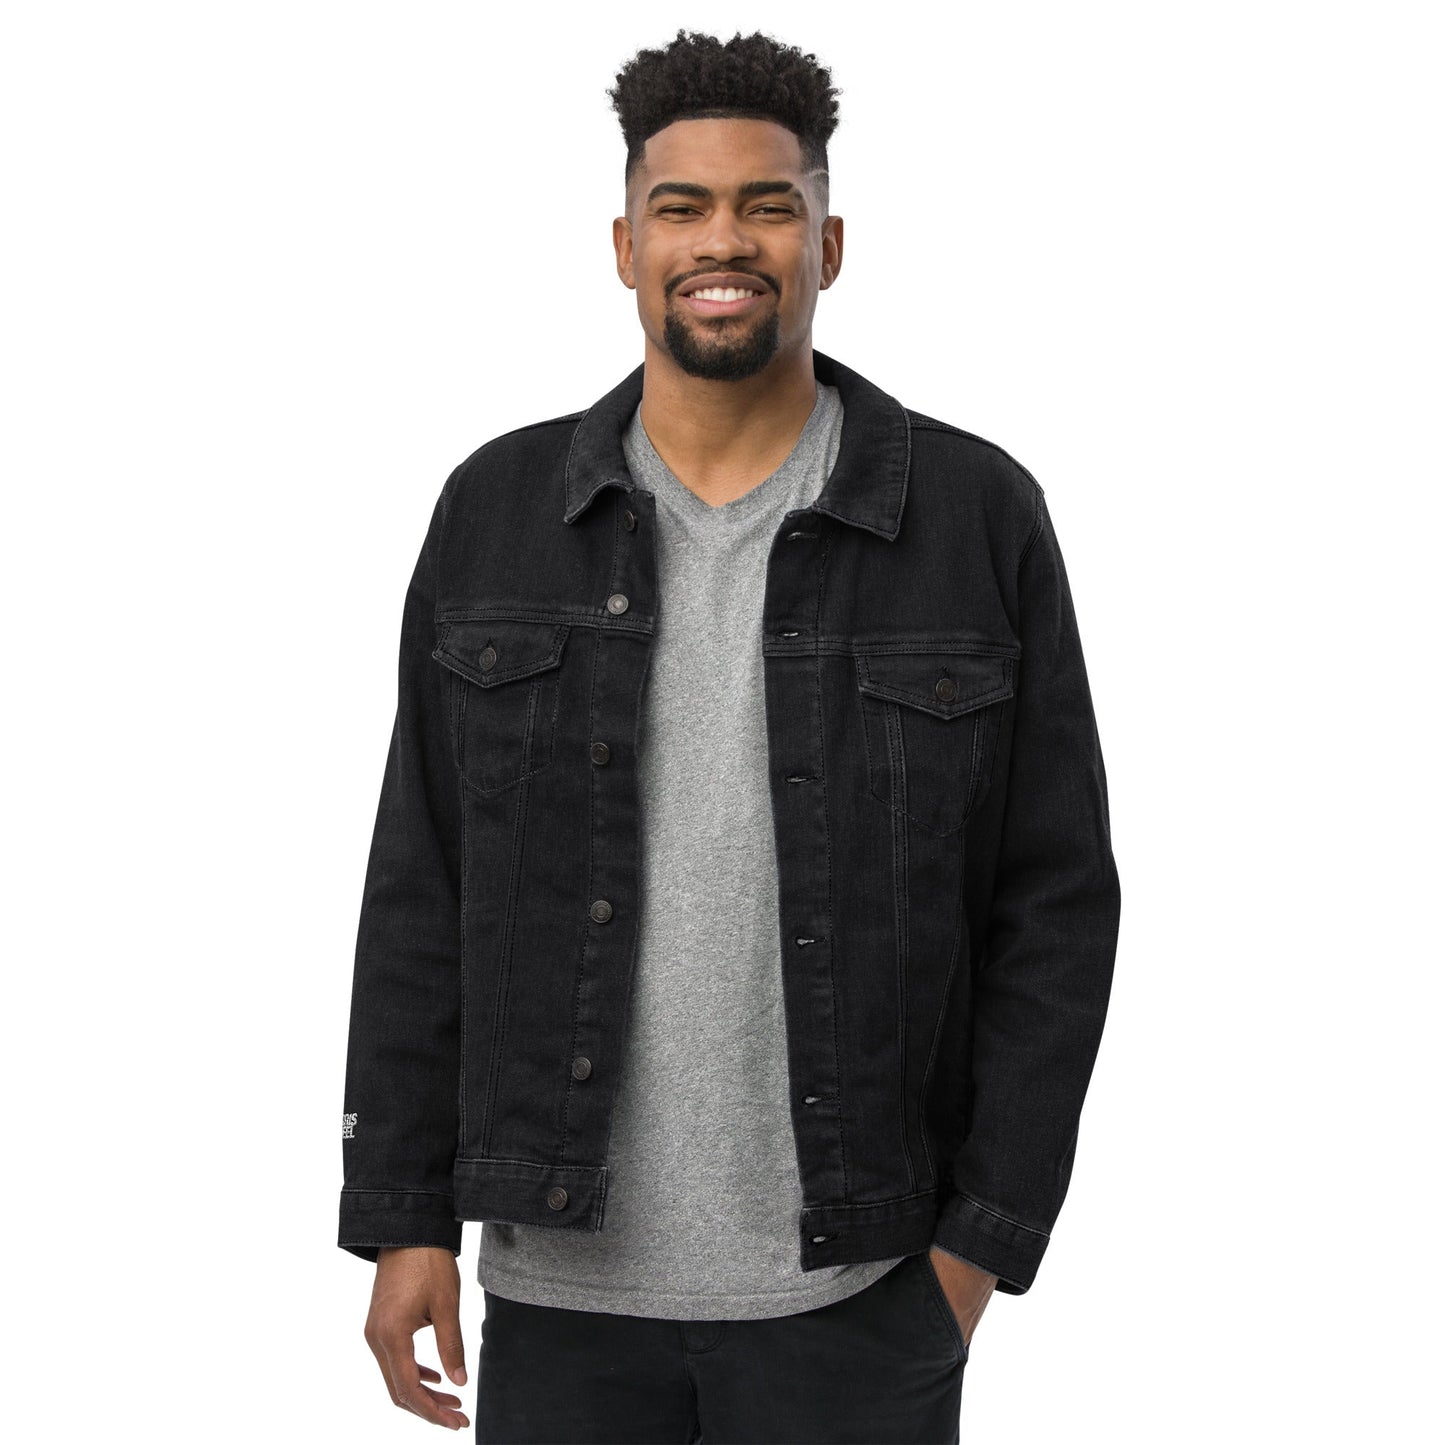 Farris Wheel Embroidered Unisex Denim Jacket - BeExtra! Apparel & More